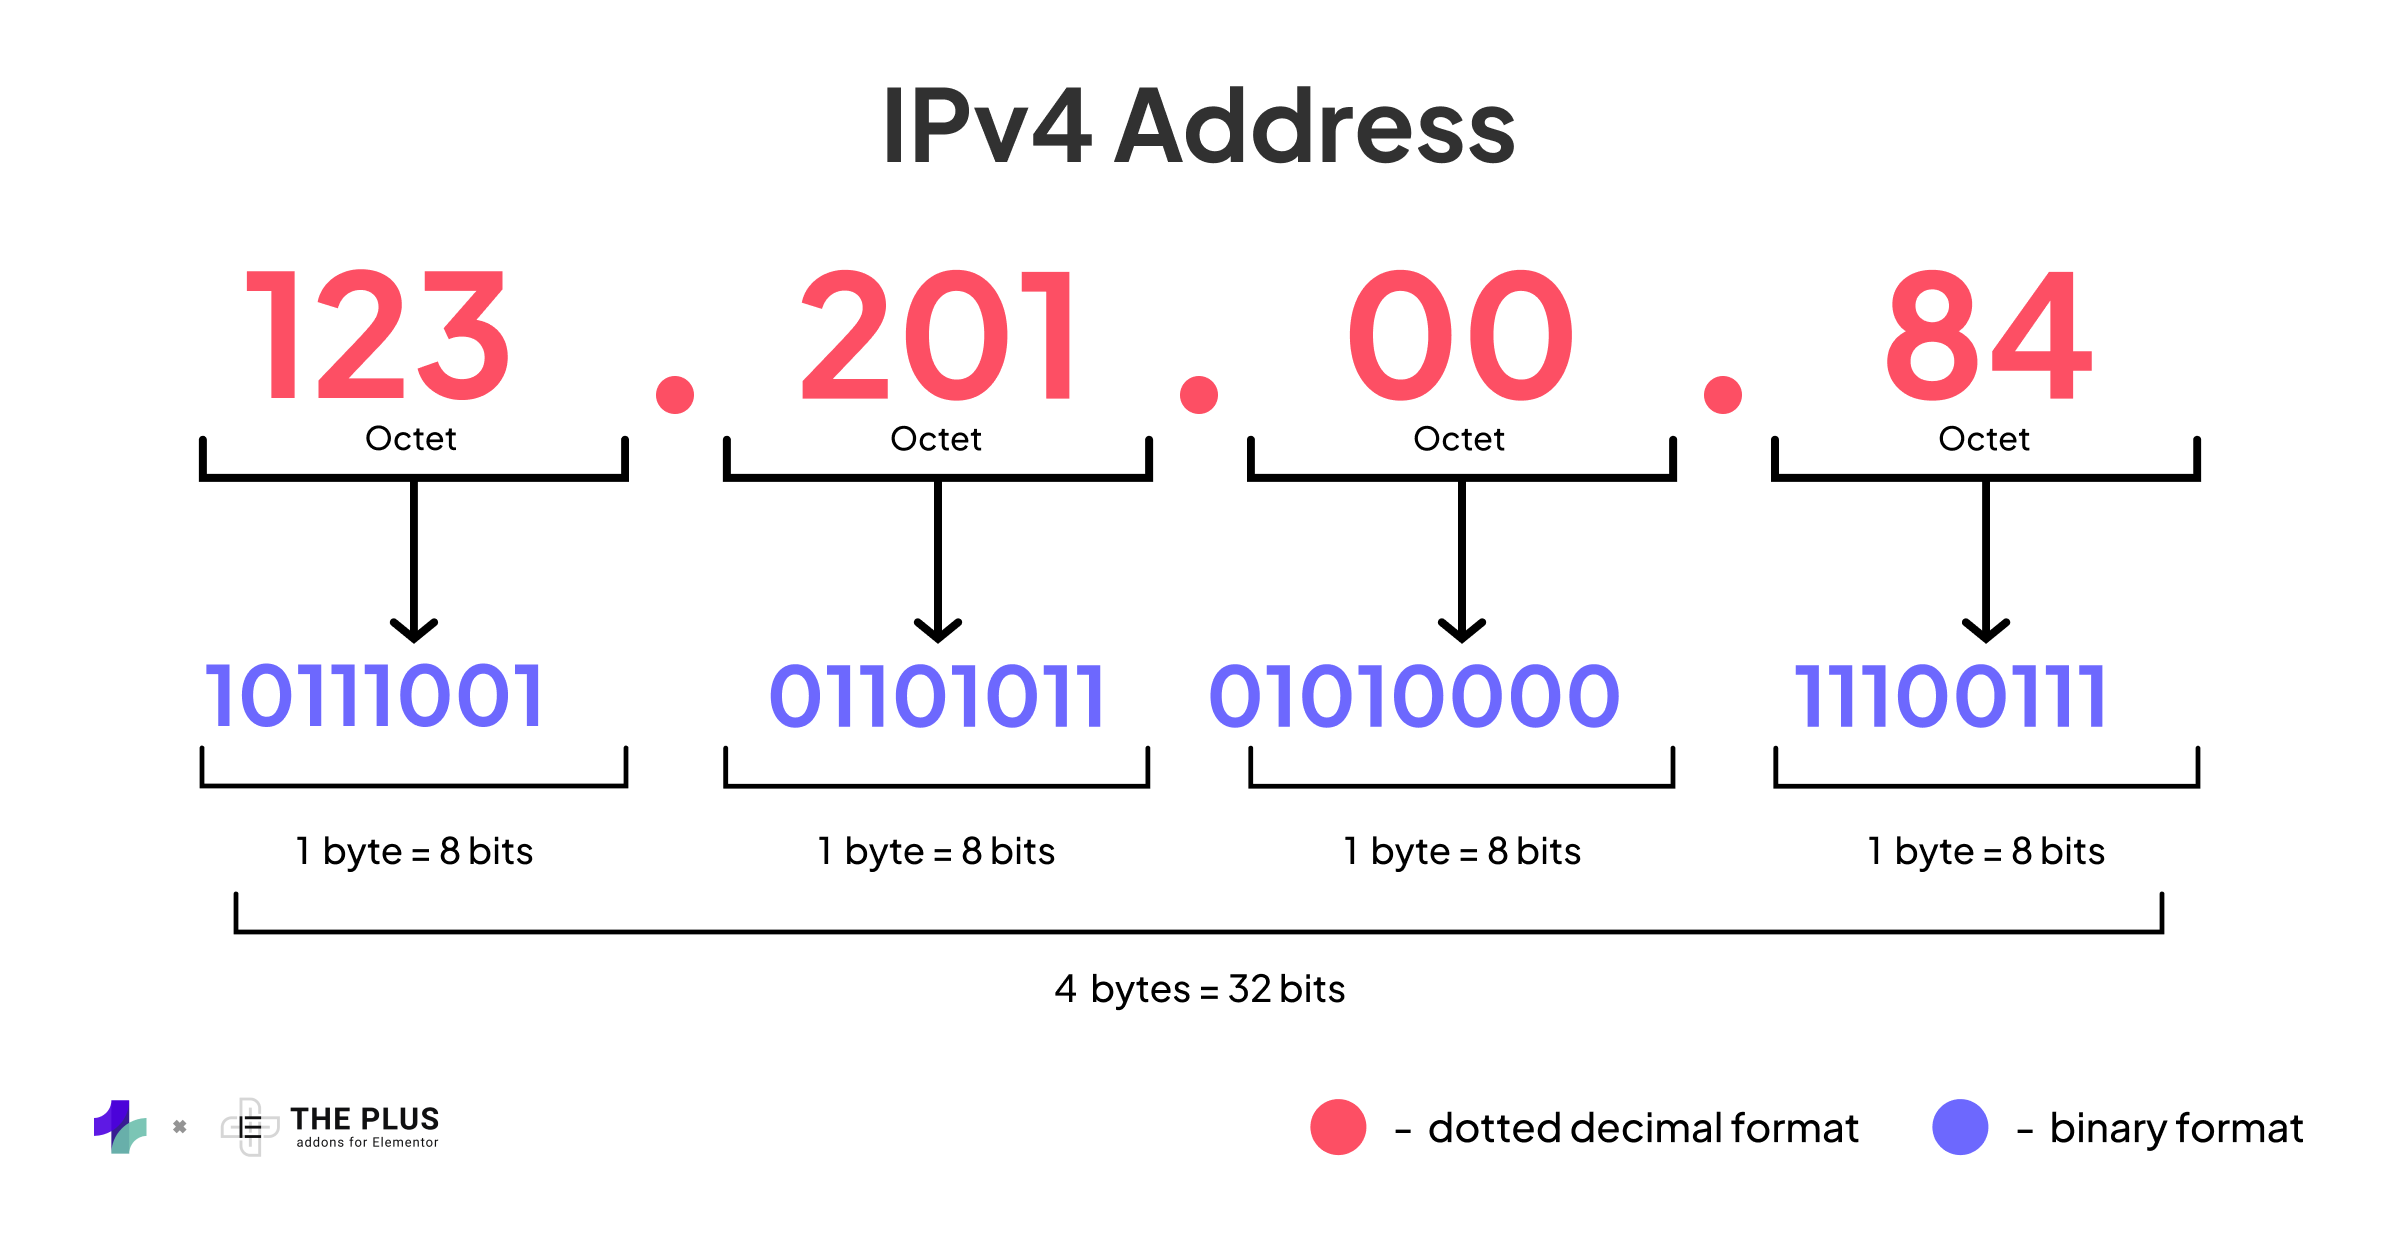 6vretphtrlqgtusbd9tc how to block ip address in wordpress [3 easy methods] from the plus addons for elementor